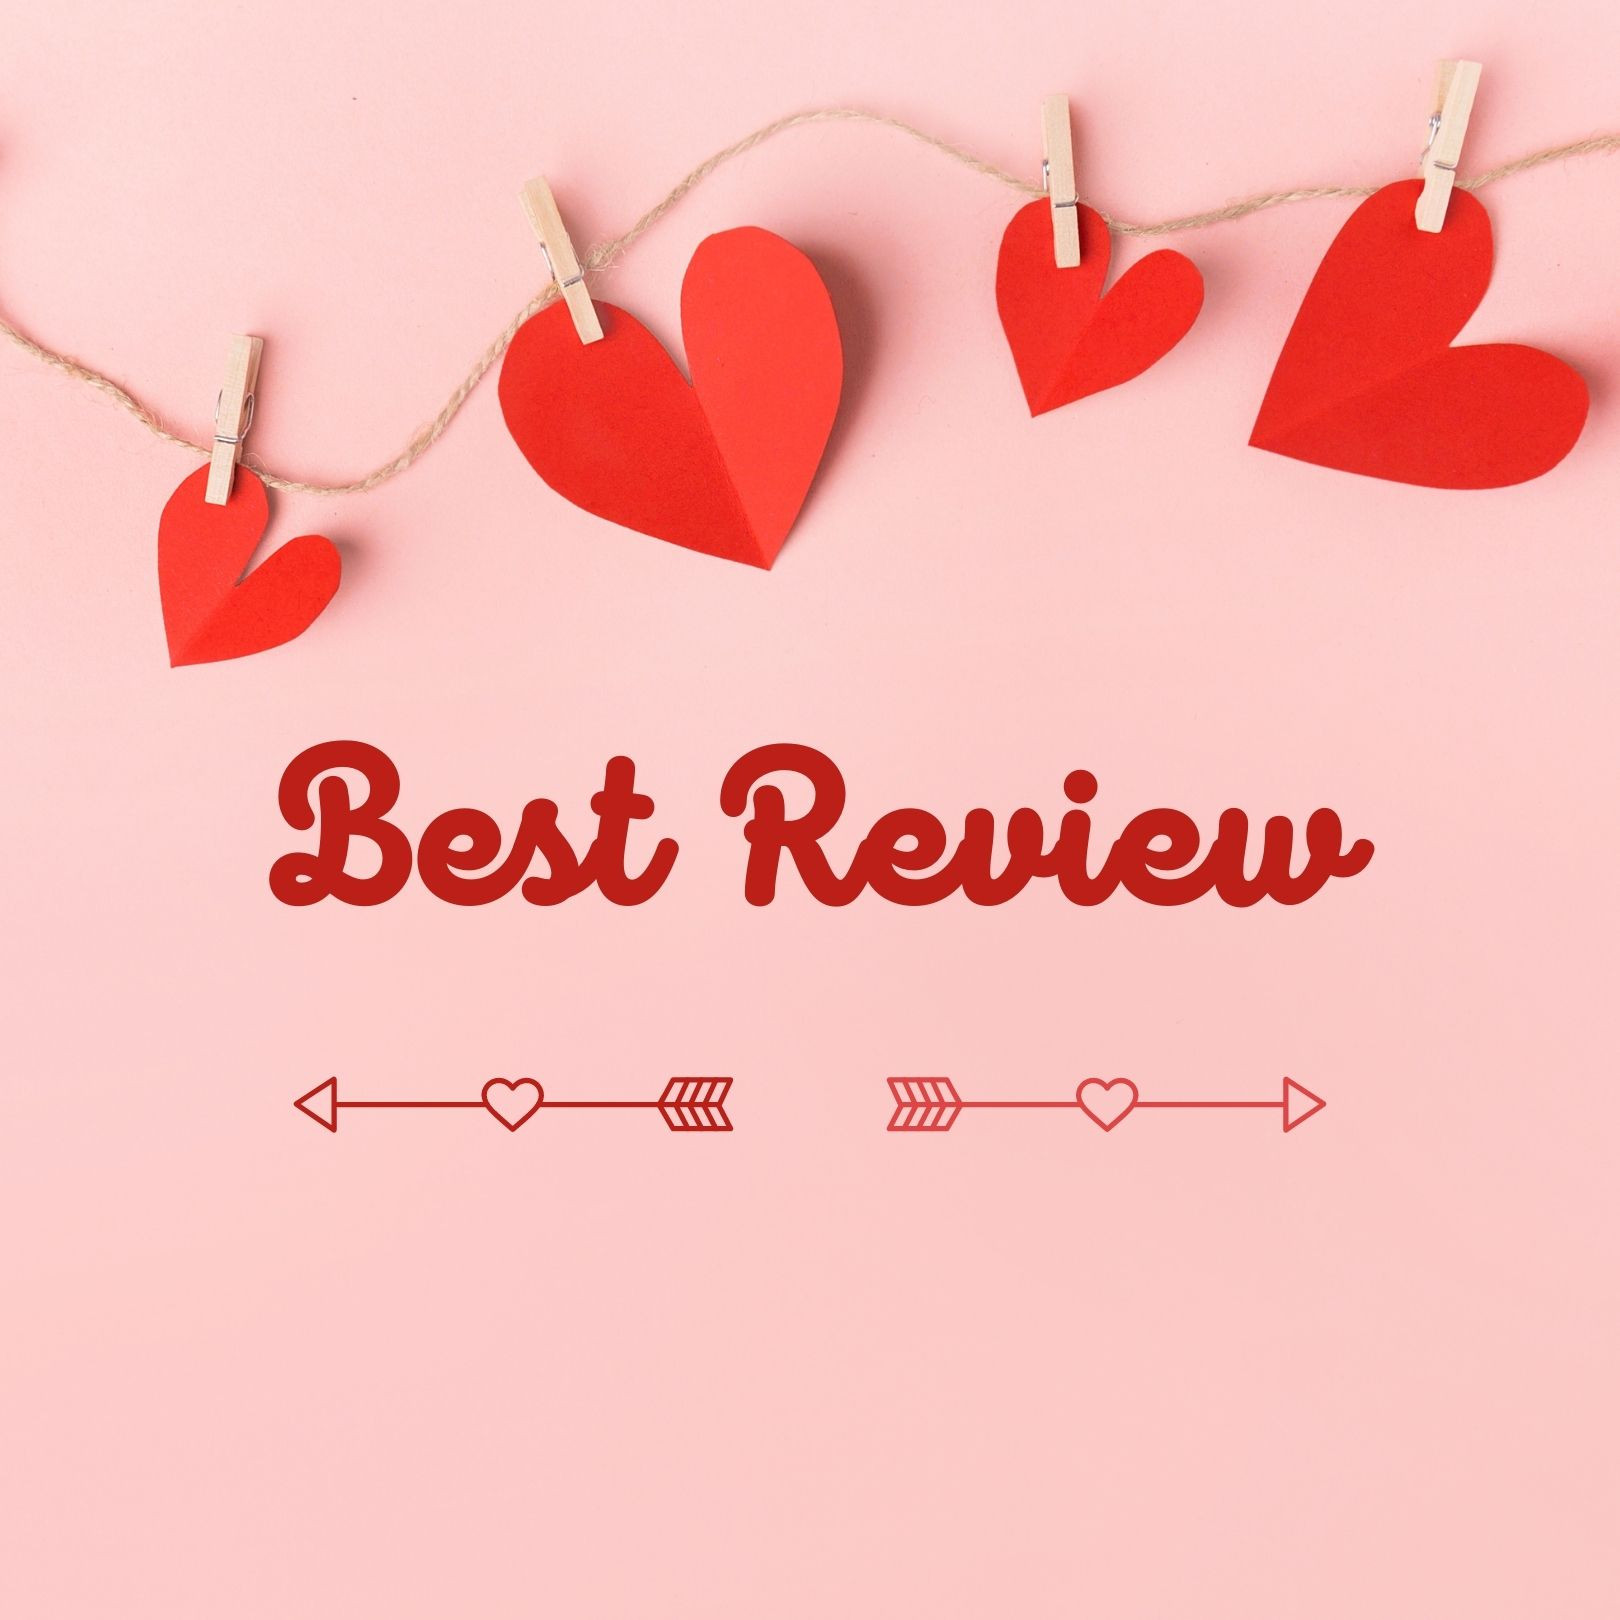 Best Review on Valentine day